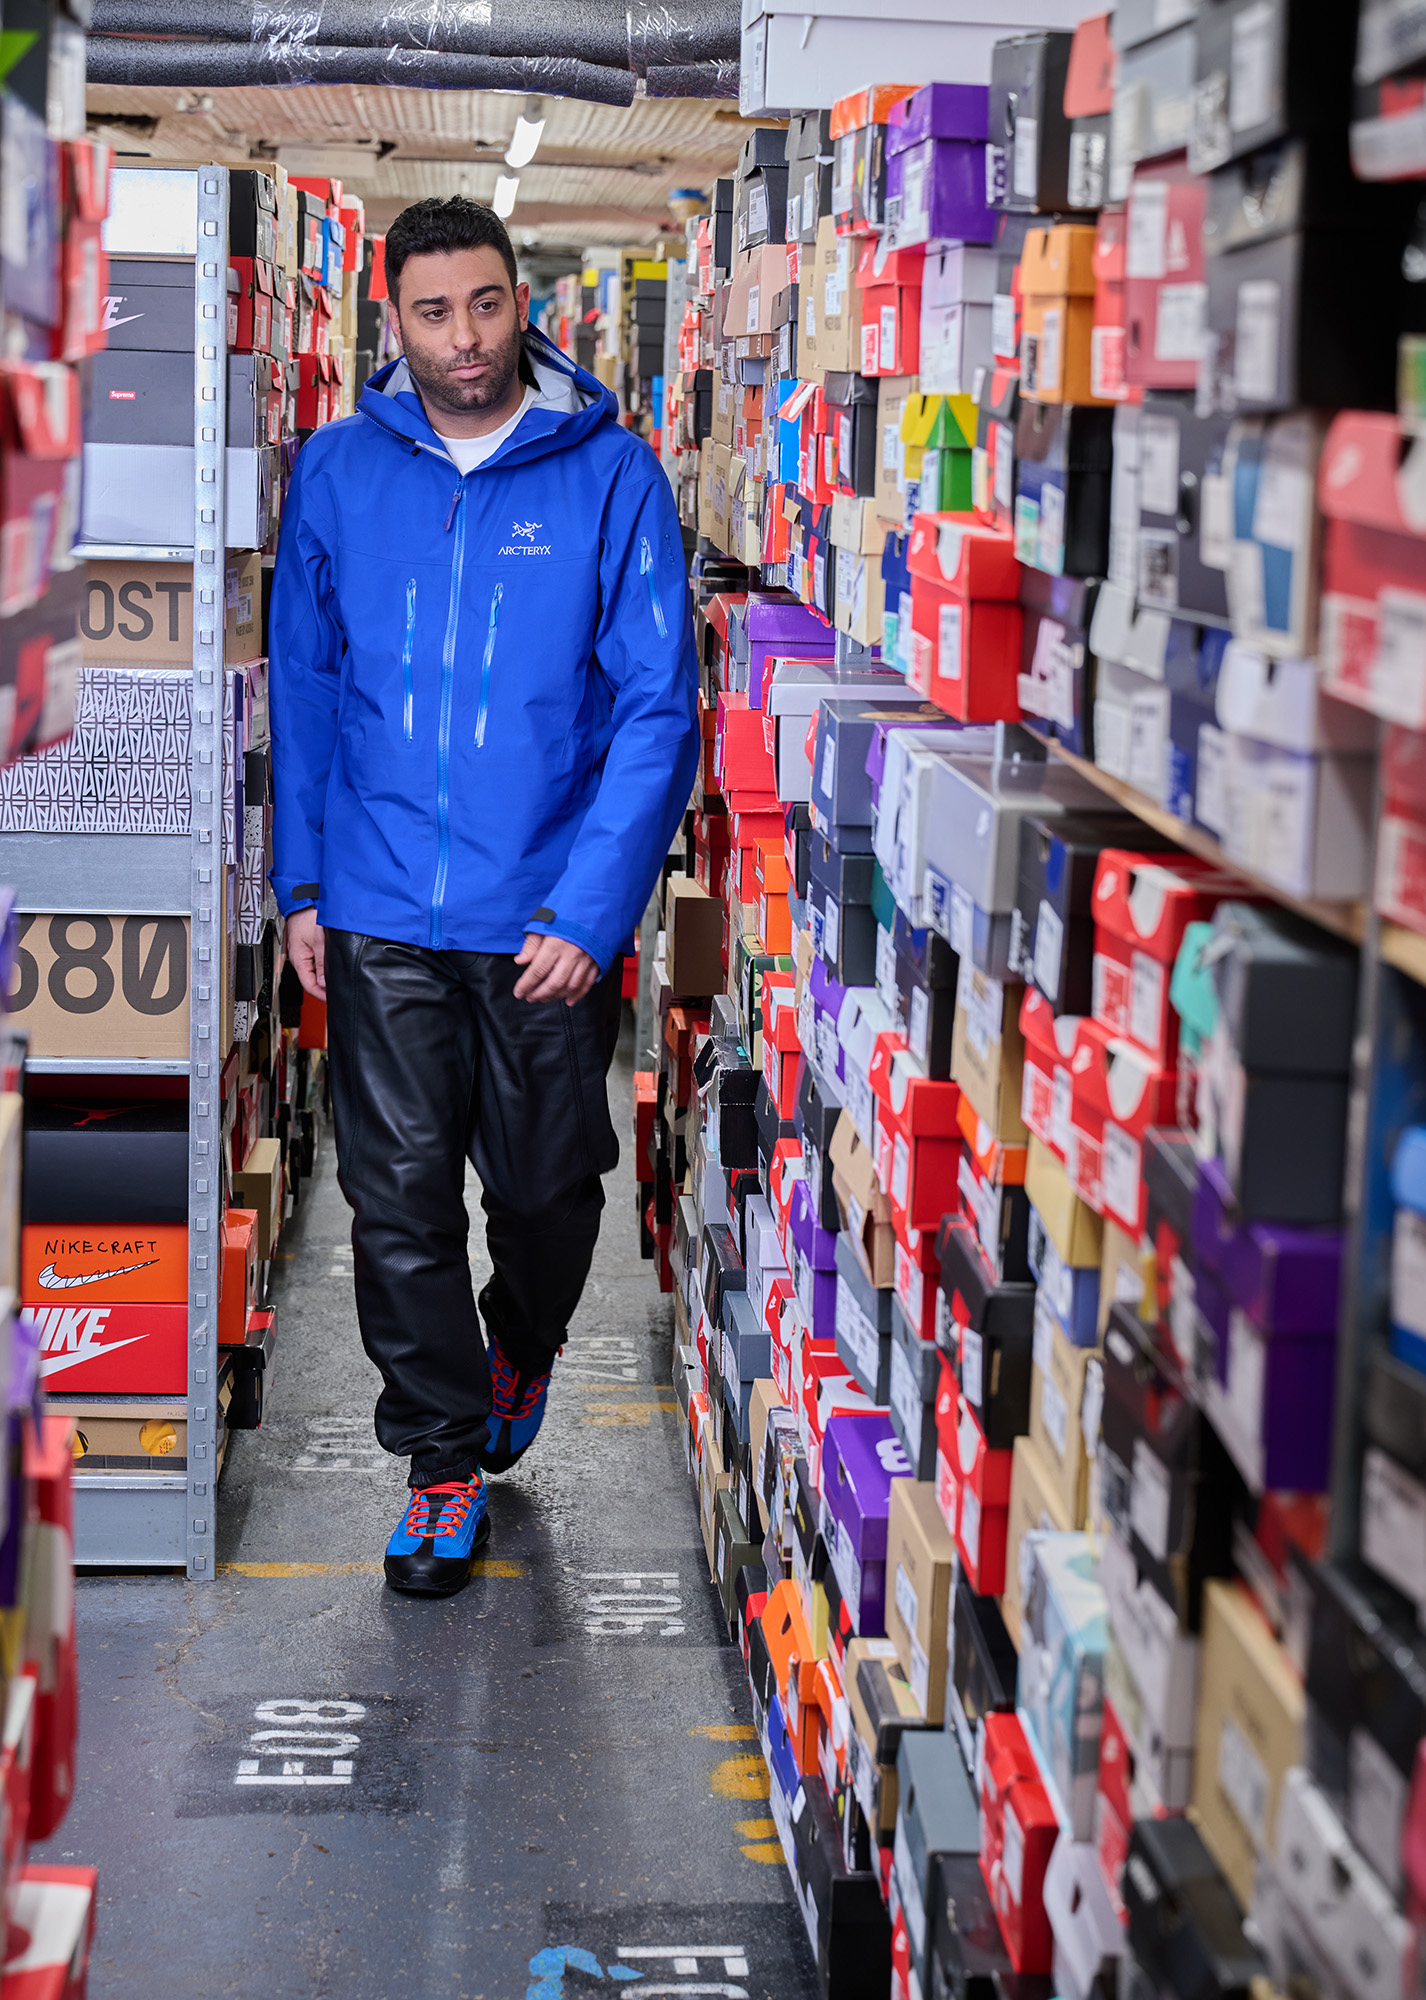 Joe La Puma walks past shelves of limited edition and rare sneakers from popular sneak brands.